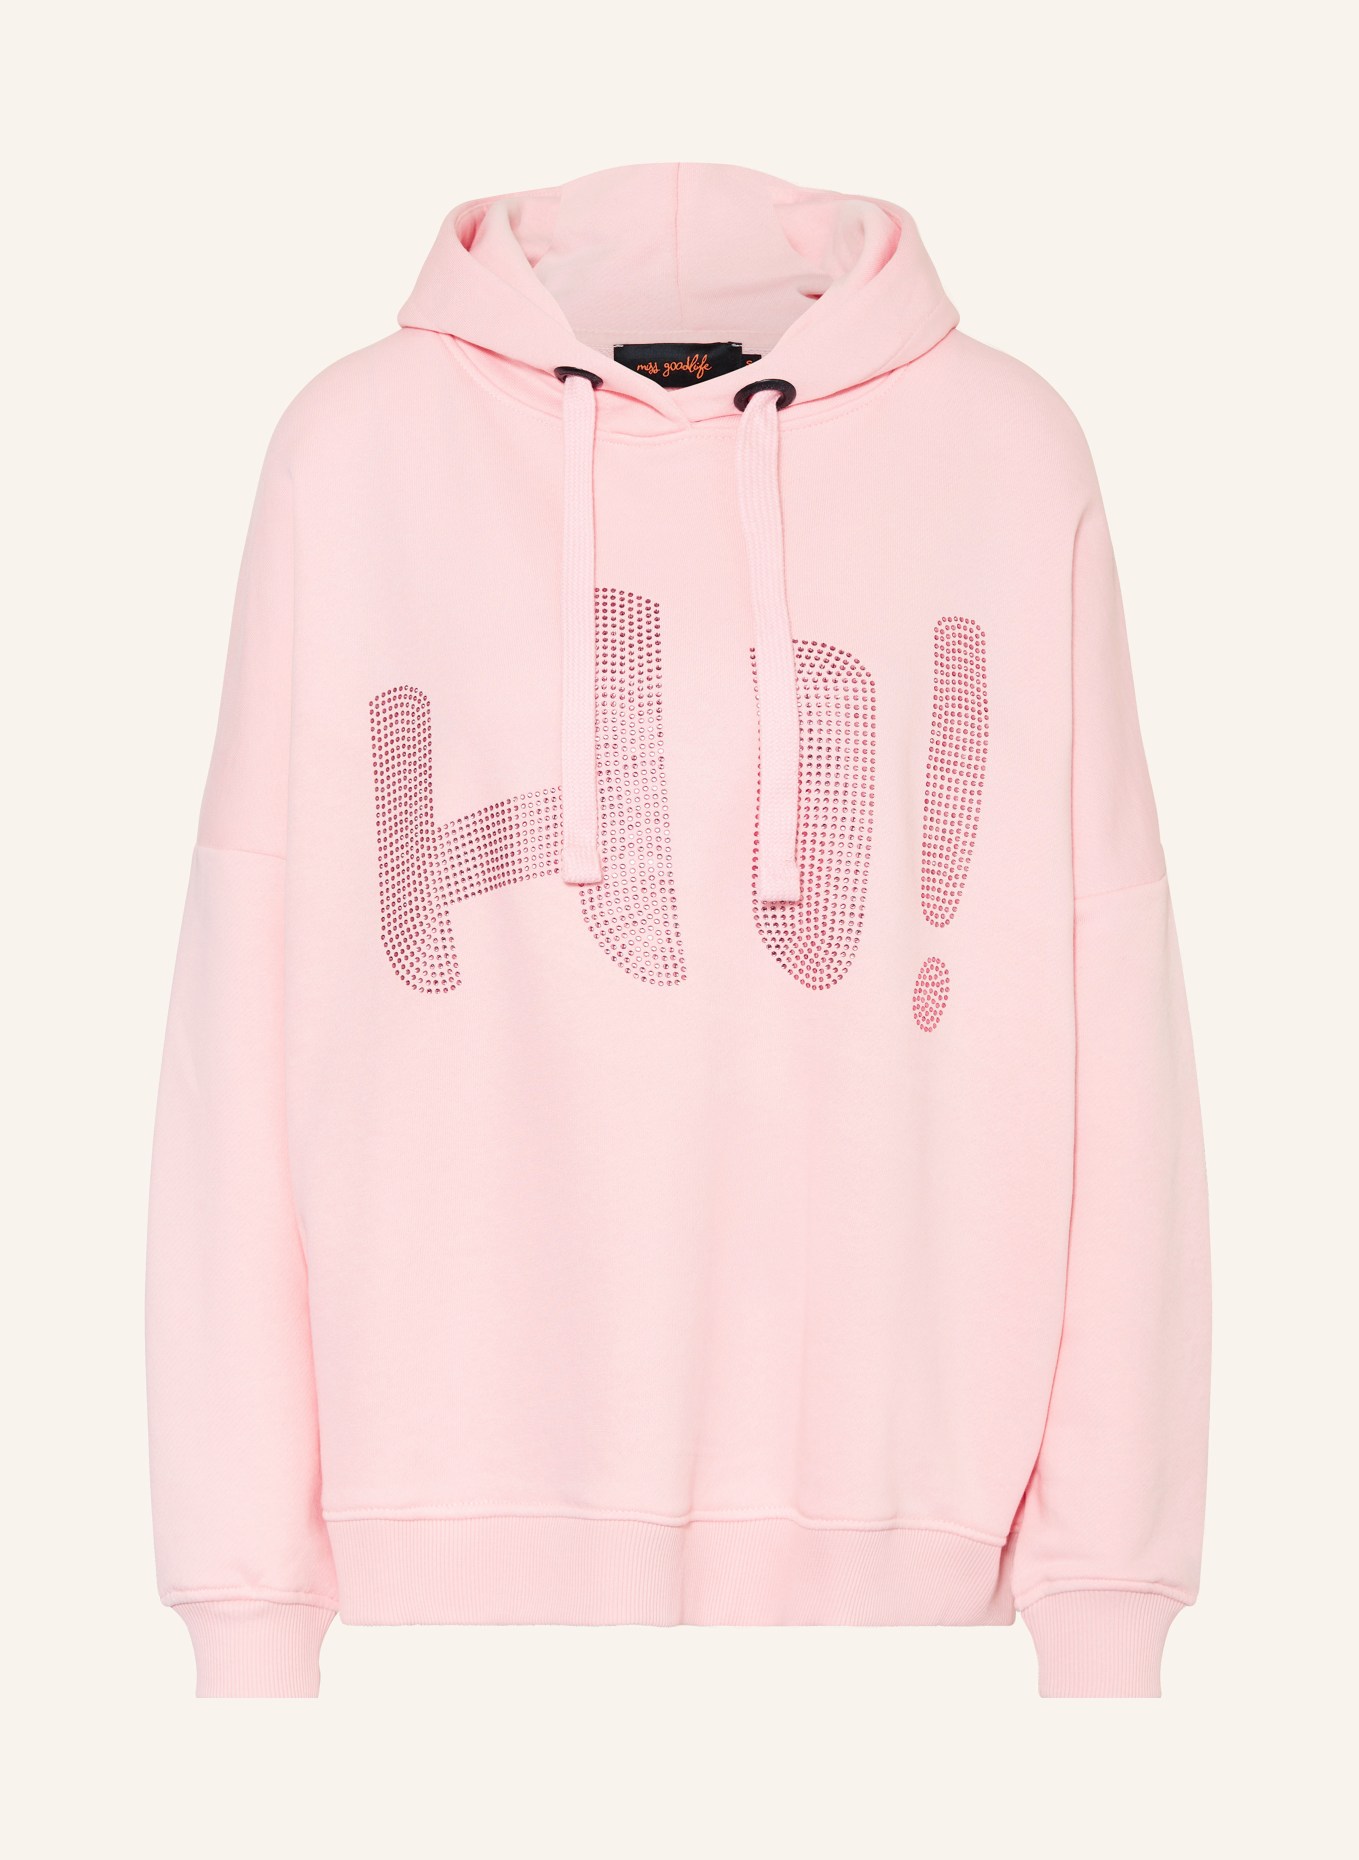 miss goodlife Hoodie with decorative gems, Color: PINK (Image 1)